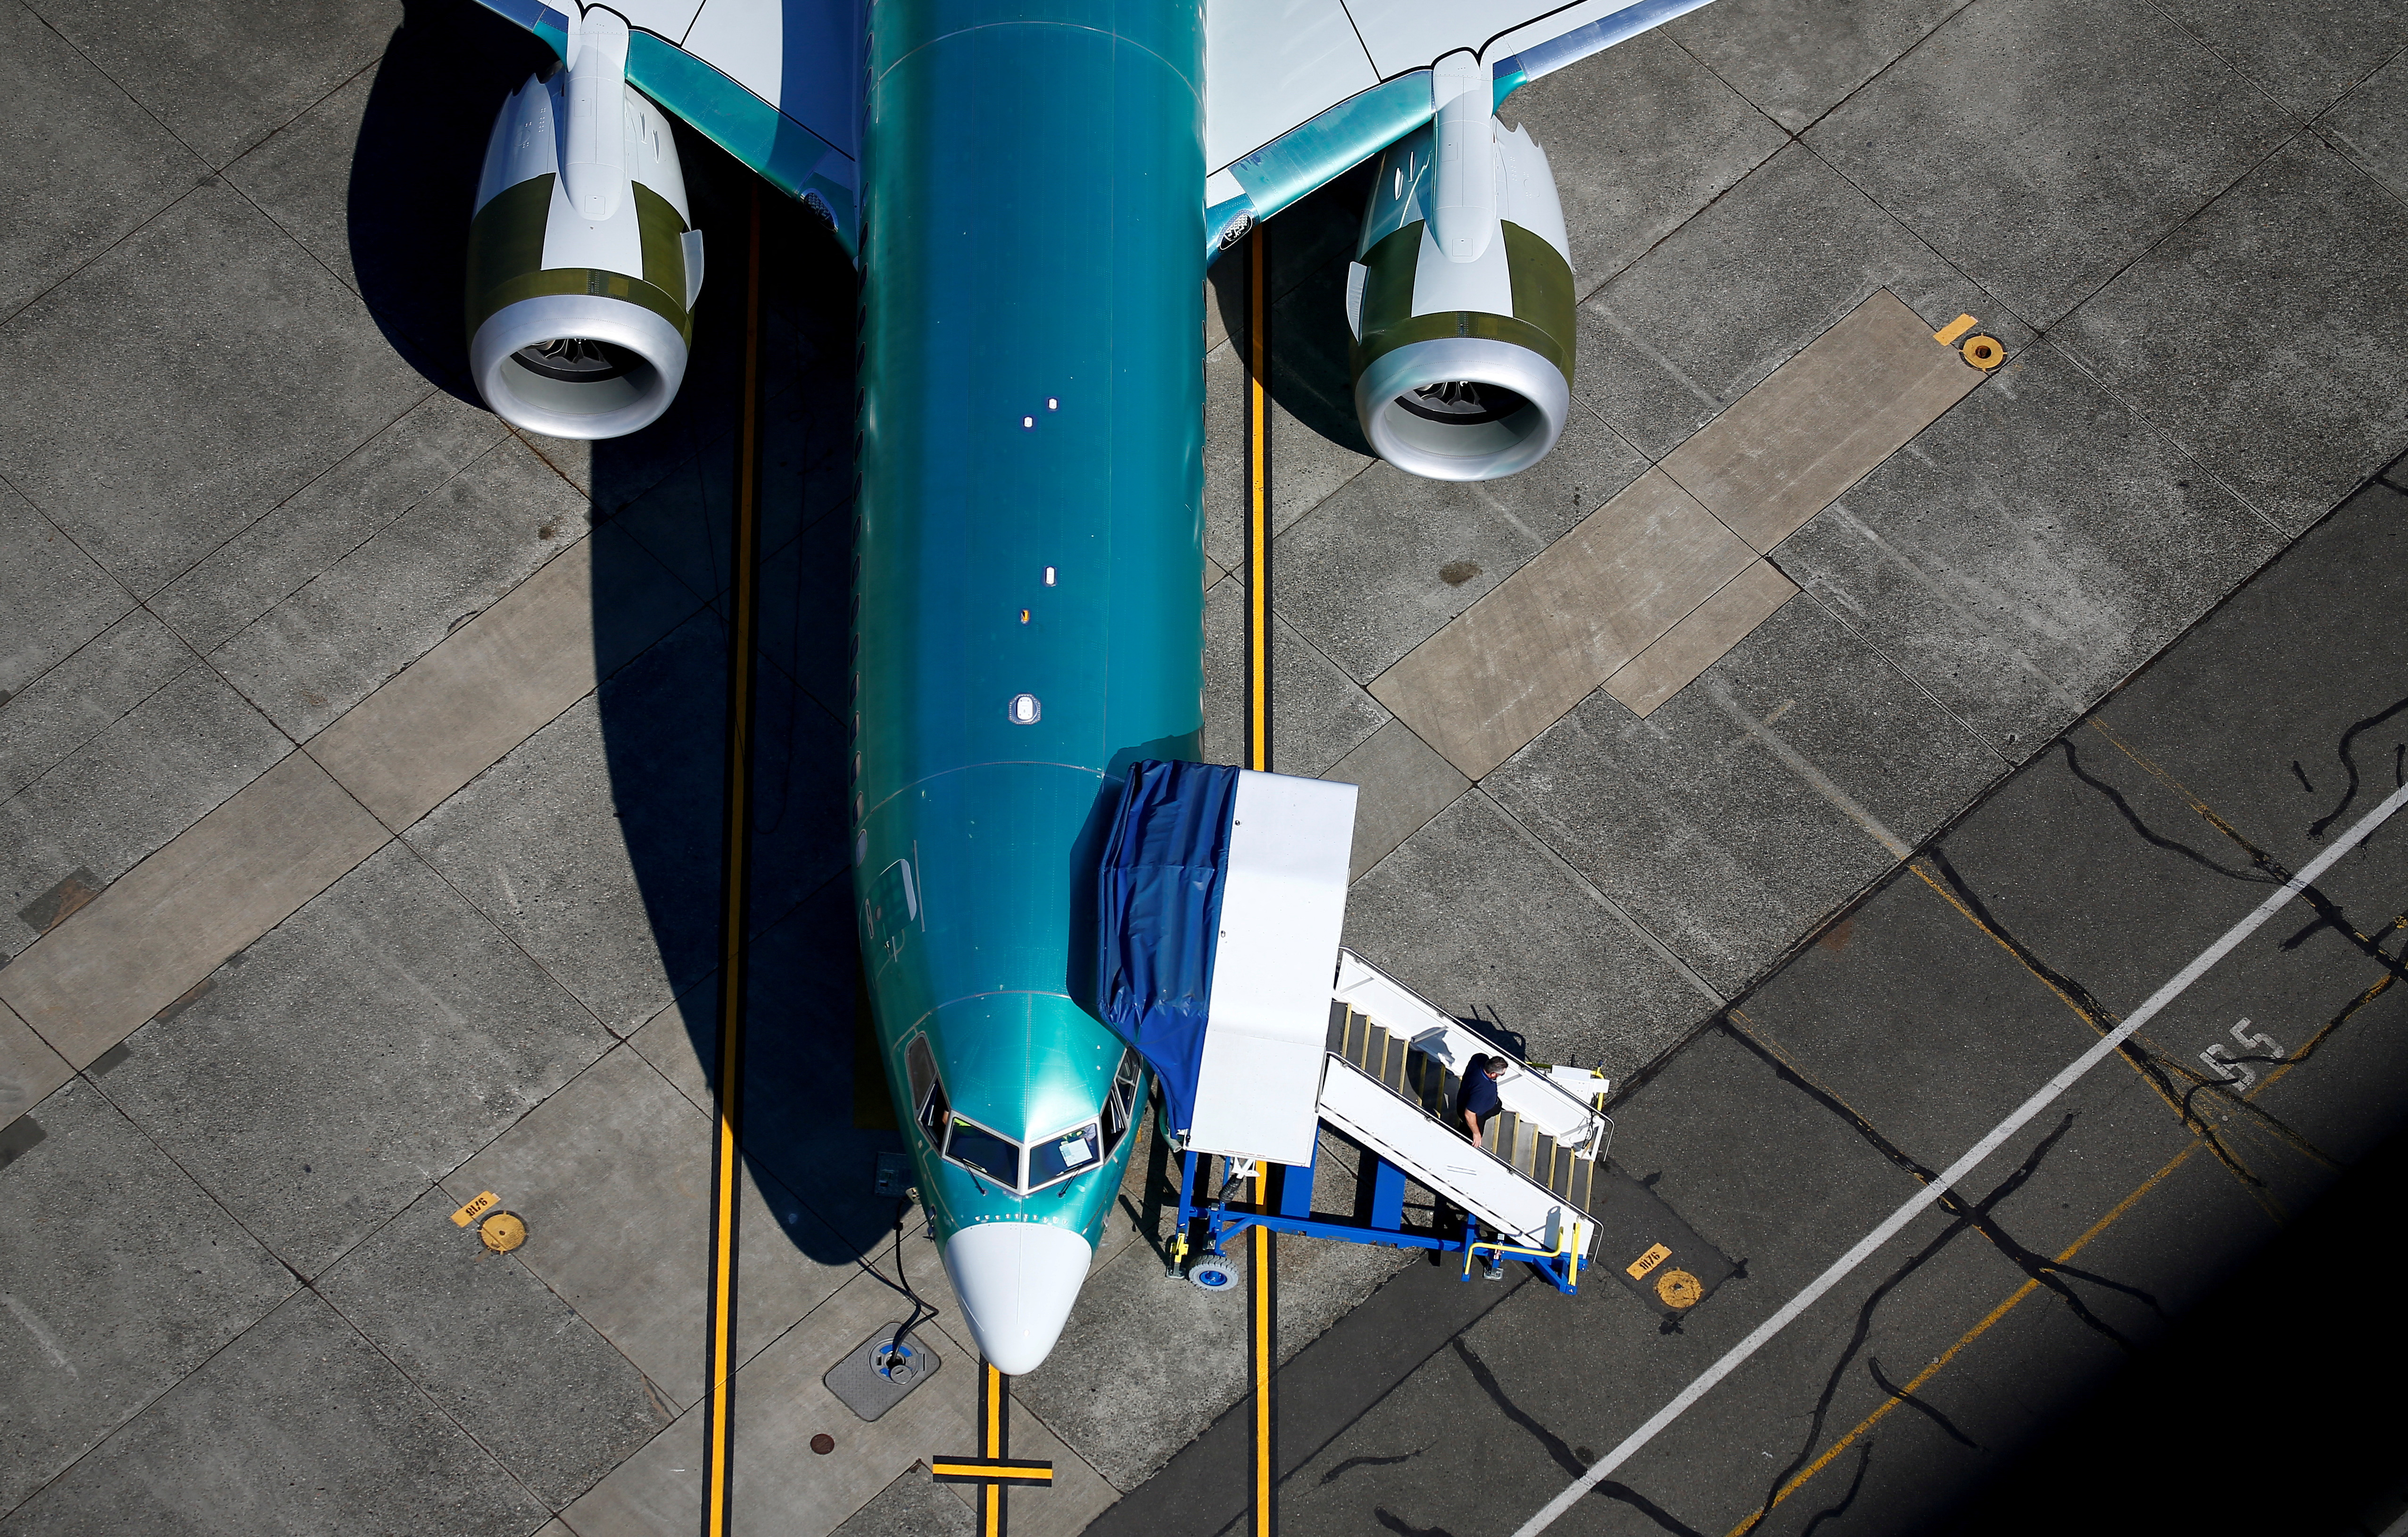 An unpainted Boeing 737 MAX aircraft is parked at Renton Municipal Airport near the Boeing Renton facility in Renton